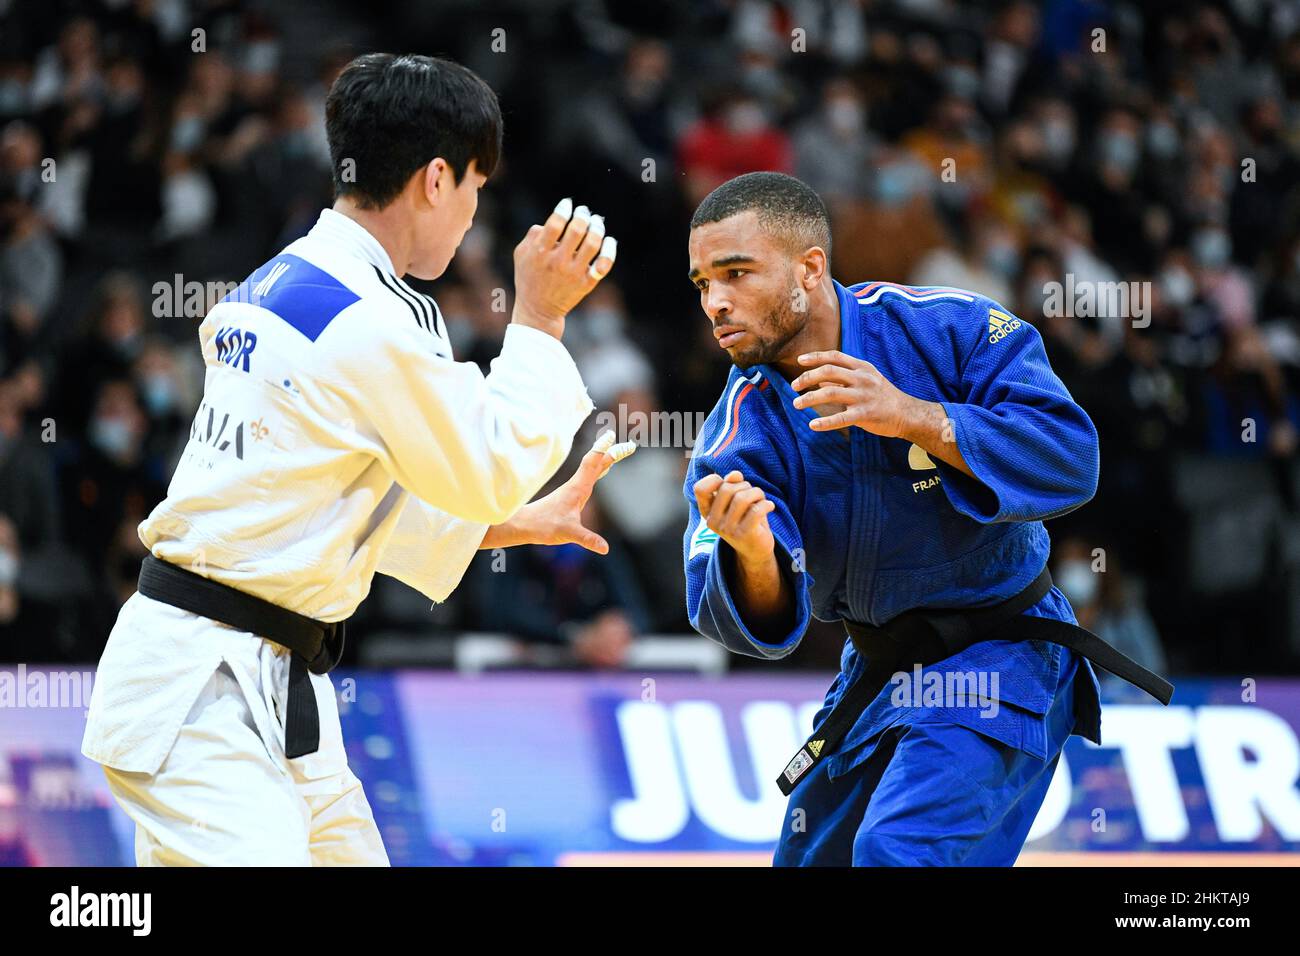 Men's -66 kg, Daikii Bouba competes during the Paris Grand Slam 2022, IJF World Judo Tour on February 5, 2022 at Accor Arena in Paris, France - Photo Victor Joly / DPPI Stock Photo